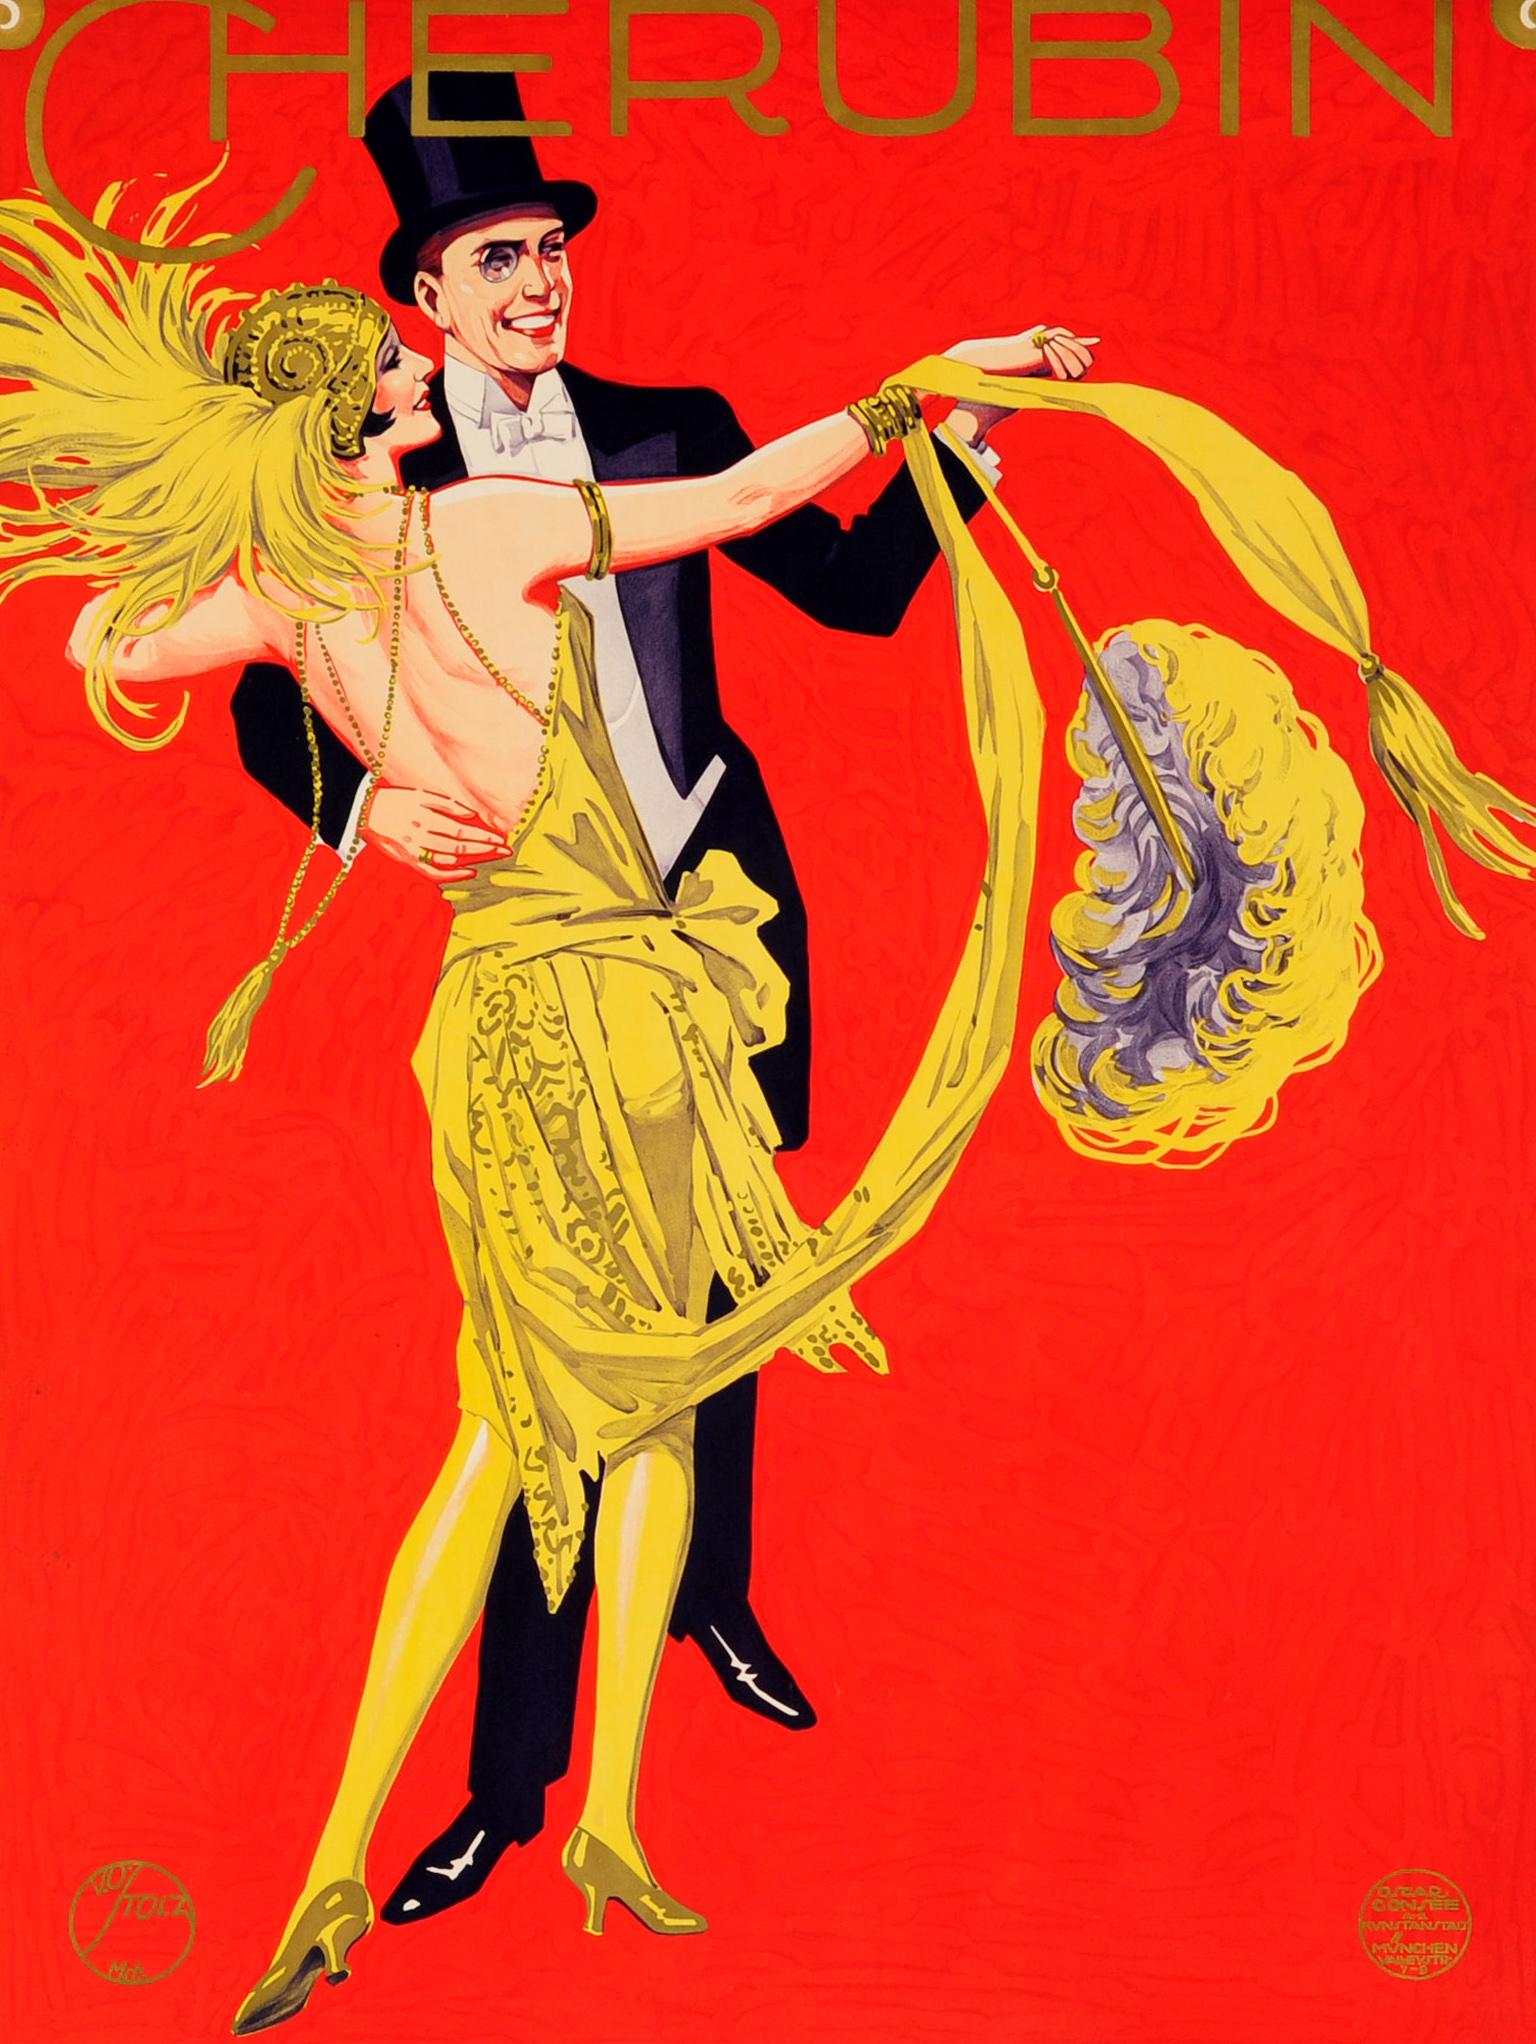 Original vintage German advertising poster for the Munich Fasching Lent Carnival at the Cherubin on 7-8 January 1928 featuring a colourful illustration by Viktor Otto Stolz (1874-1955) of a smiling couple dancing against a red background, the